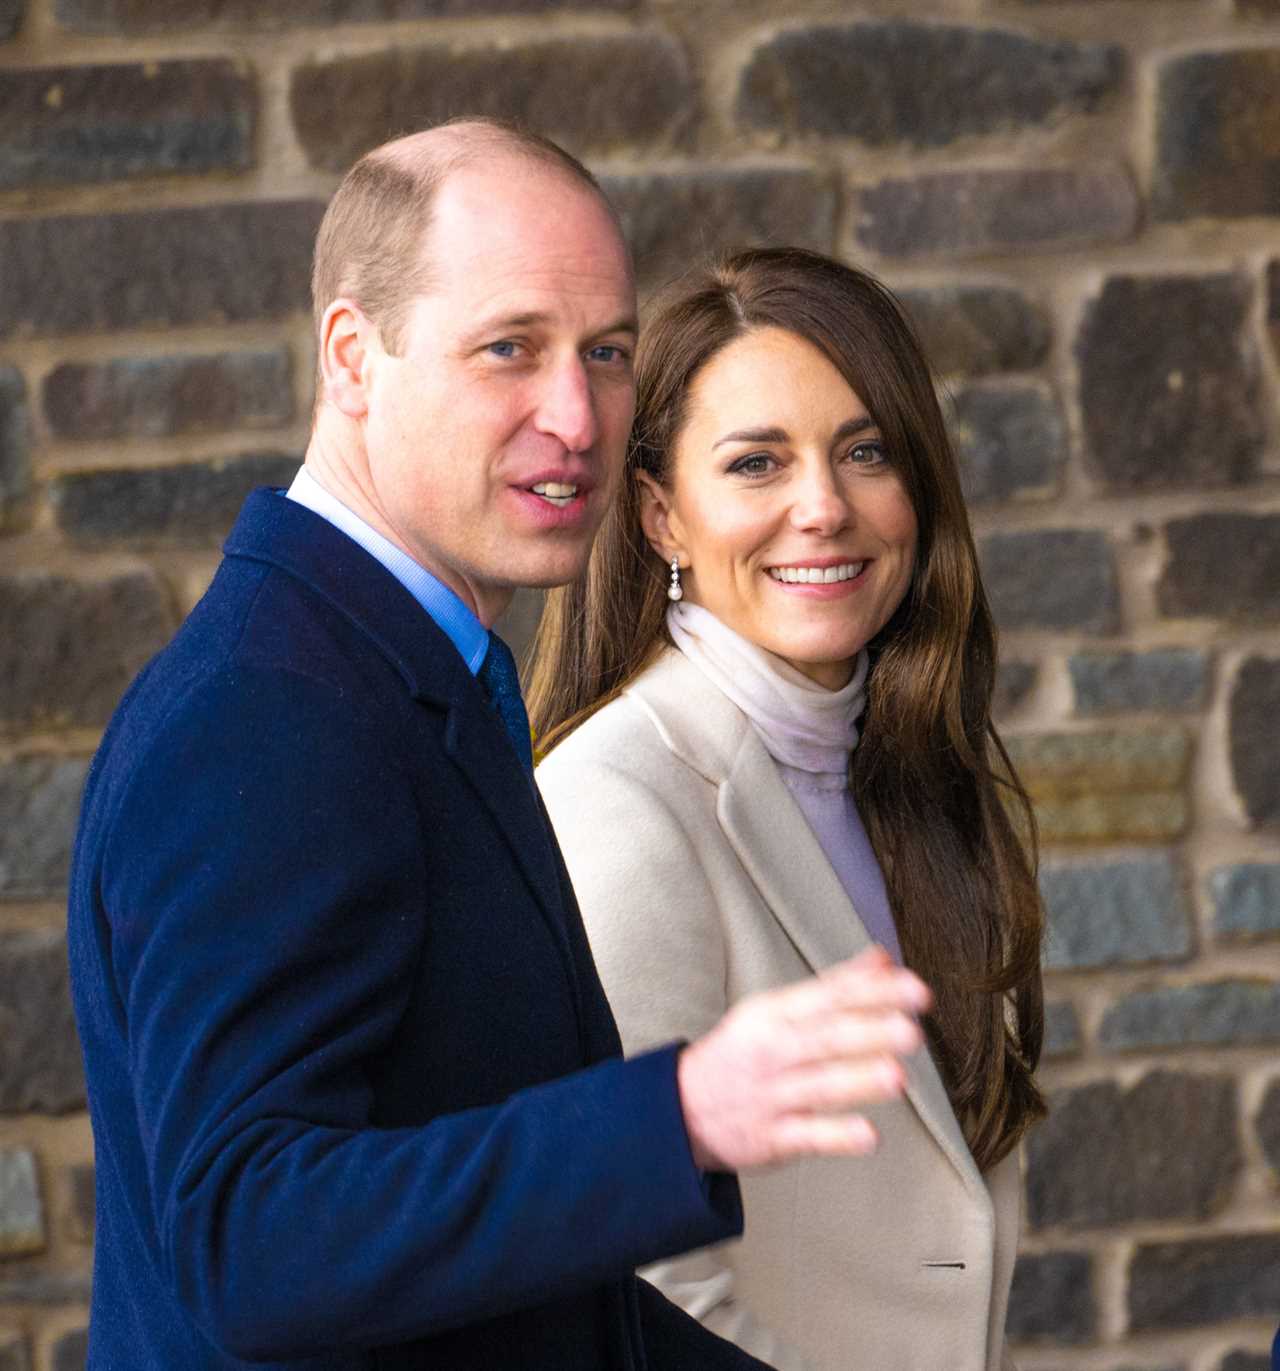 What is Prince William’s and Kate Middleton’s net worth?